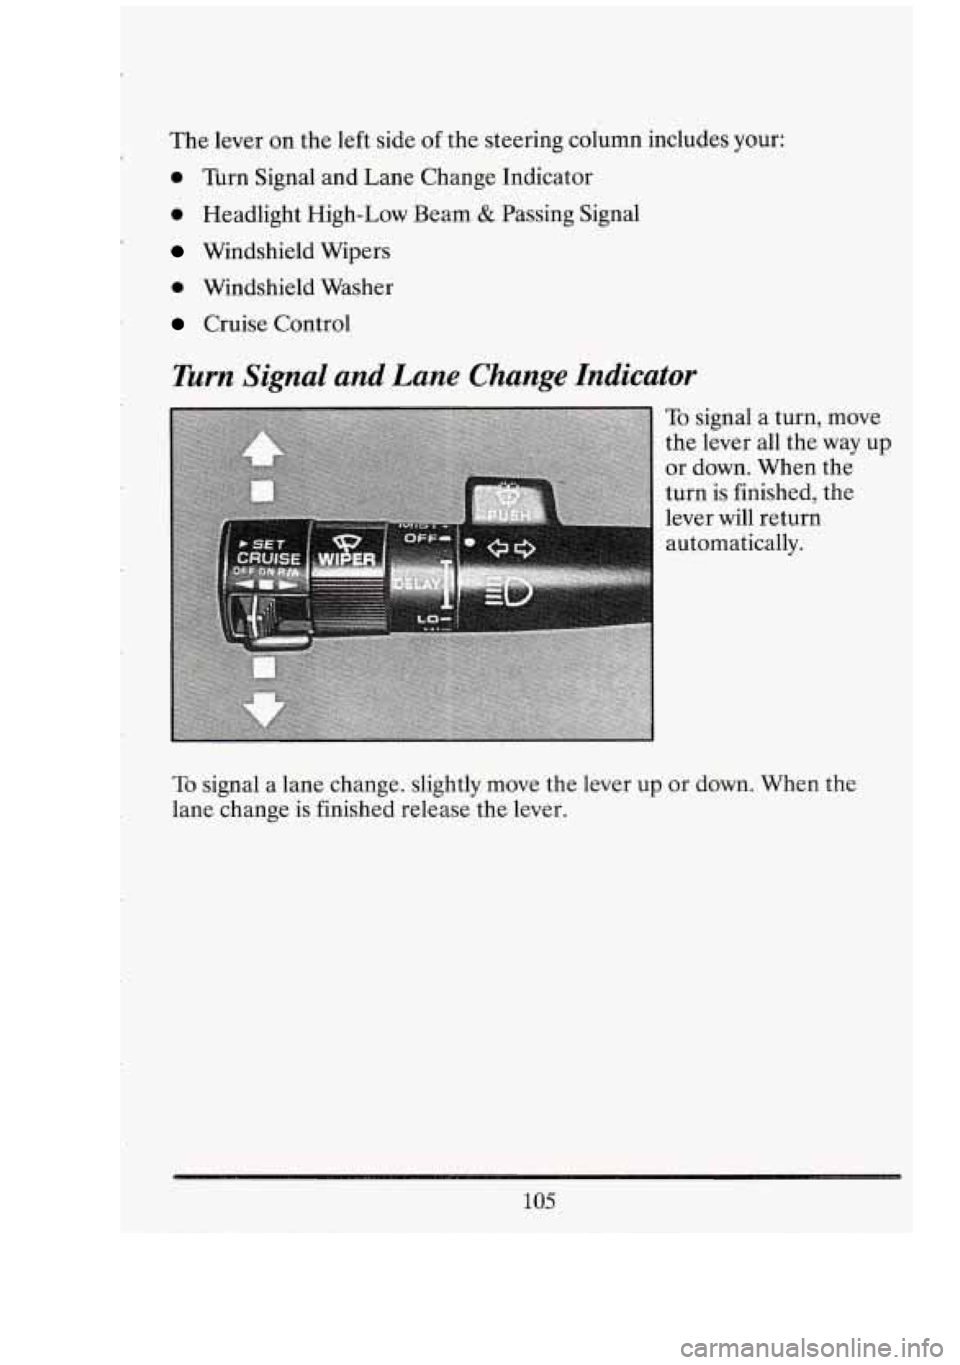 CADILLAC FLEETWOOD 1994  Owners Manual The lever  on  the  left side  of the  steering  column includes  your: 
0 Turn  Signal  and Lane  Change Indicator 
0 Headlight  High-Low  Beam & Passing  Signal 
Windshield  Wipers 
0 Windshield  Wa